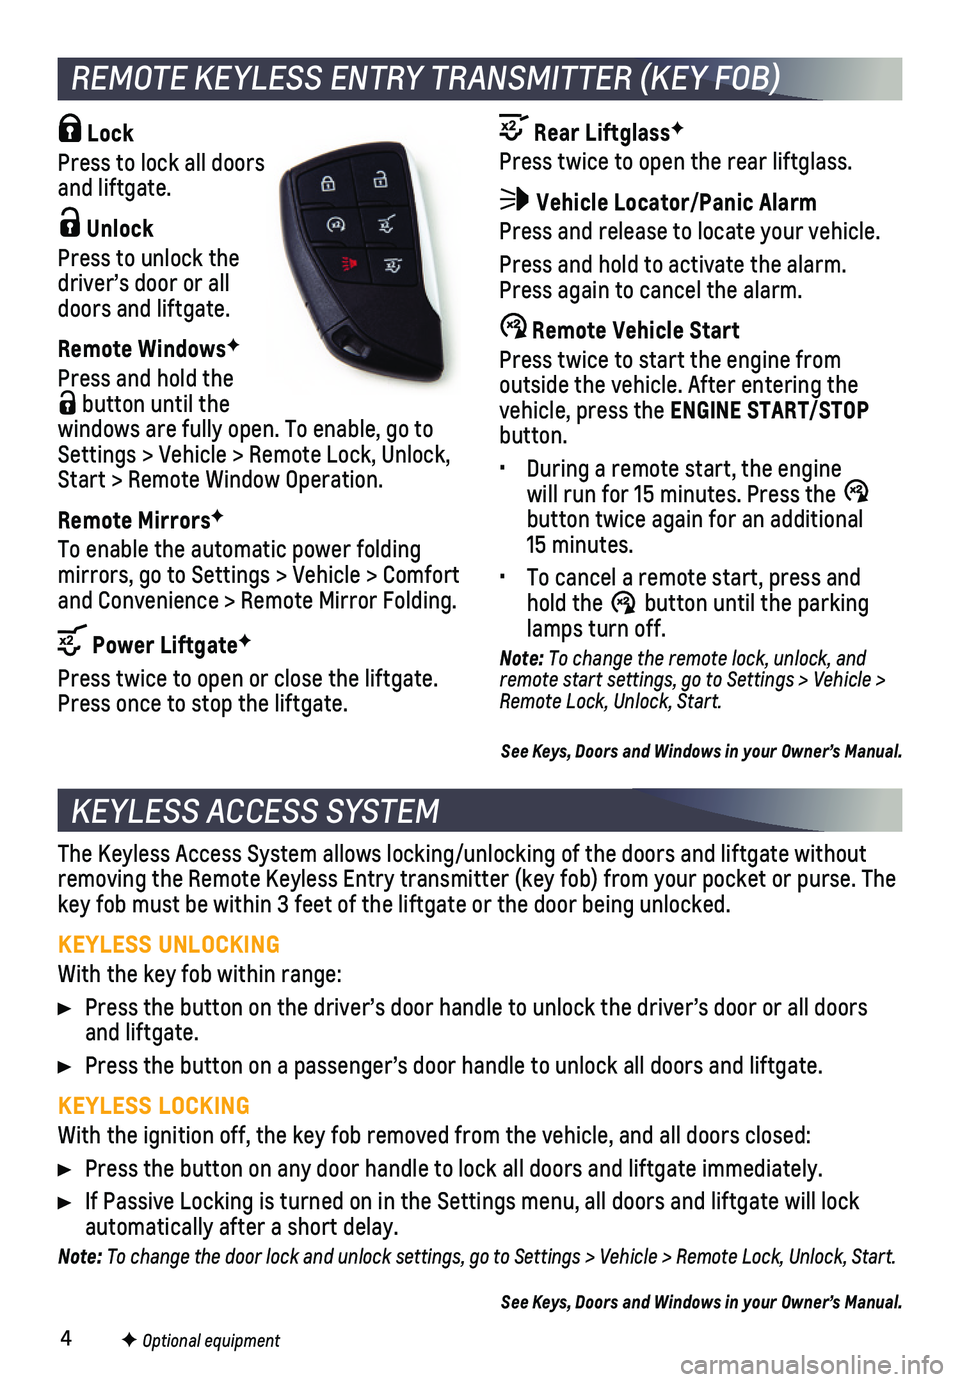 CHEVROLET SUBURBAN 2021  Get To Know Guide 4F Optional equipment
The Keyless Access System allows locking/unlocking of the doors and lift\
gate without removing the Remote Keyless Entry transmitter (key fob) from your pock\
et or purse. The ke